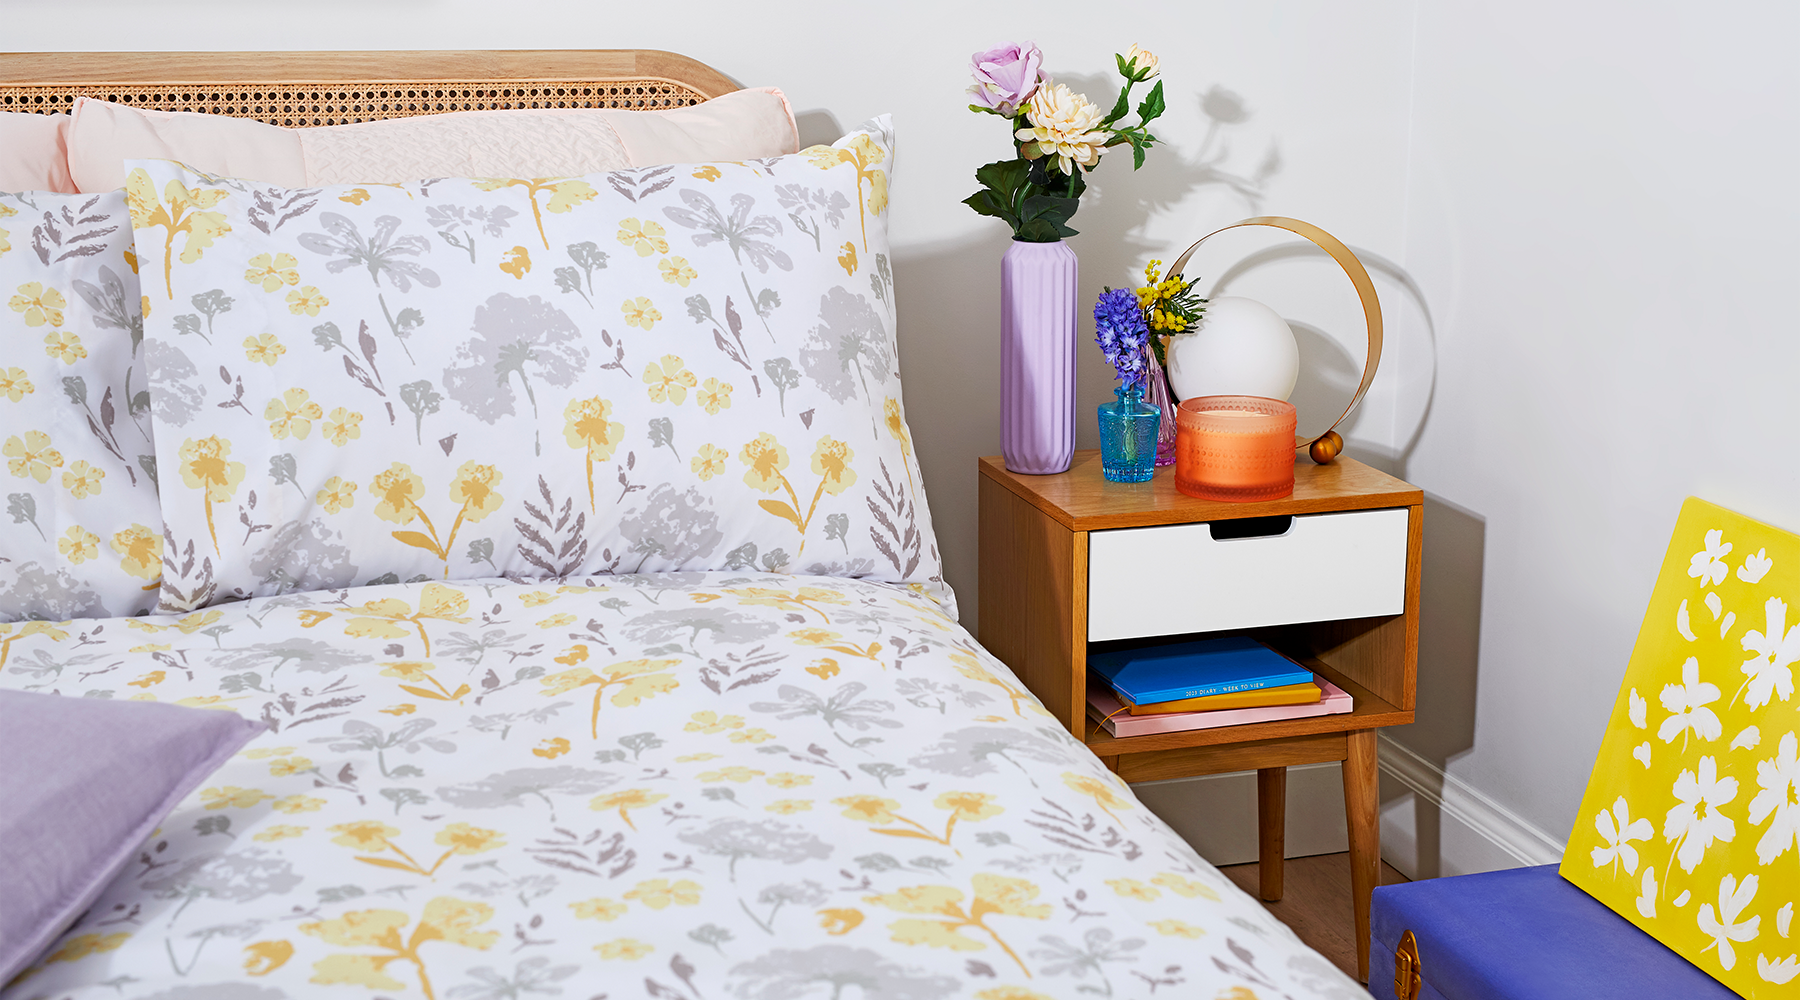 Bright and floral Cozee Home bedding